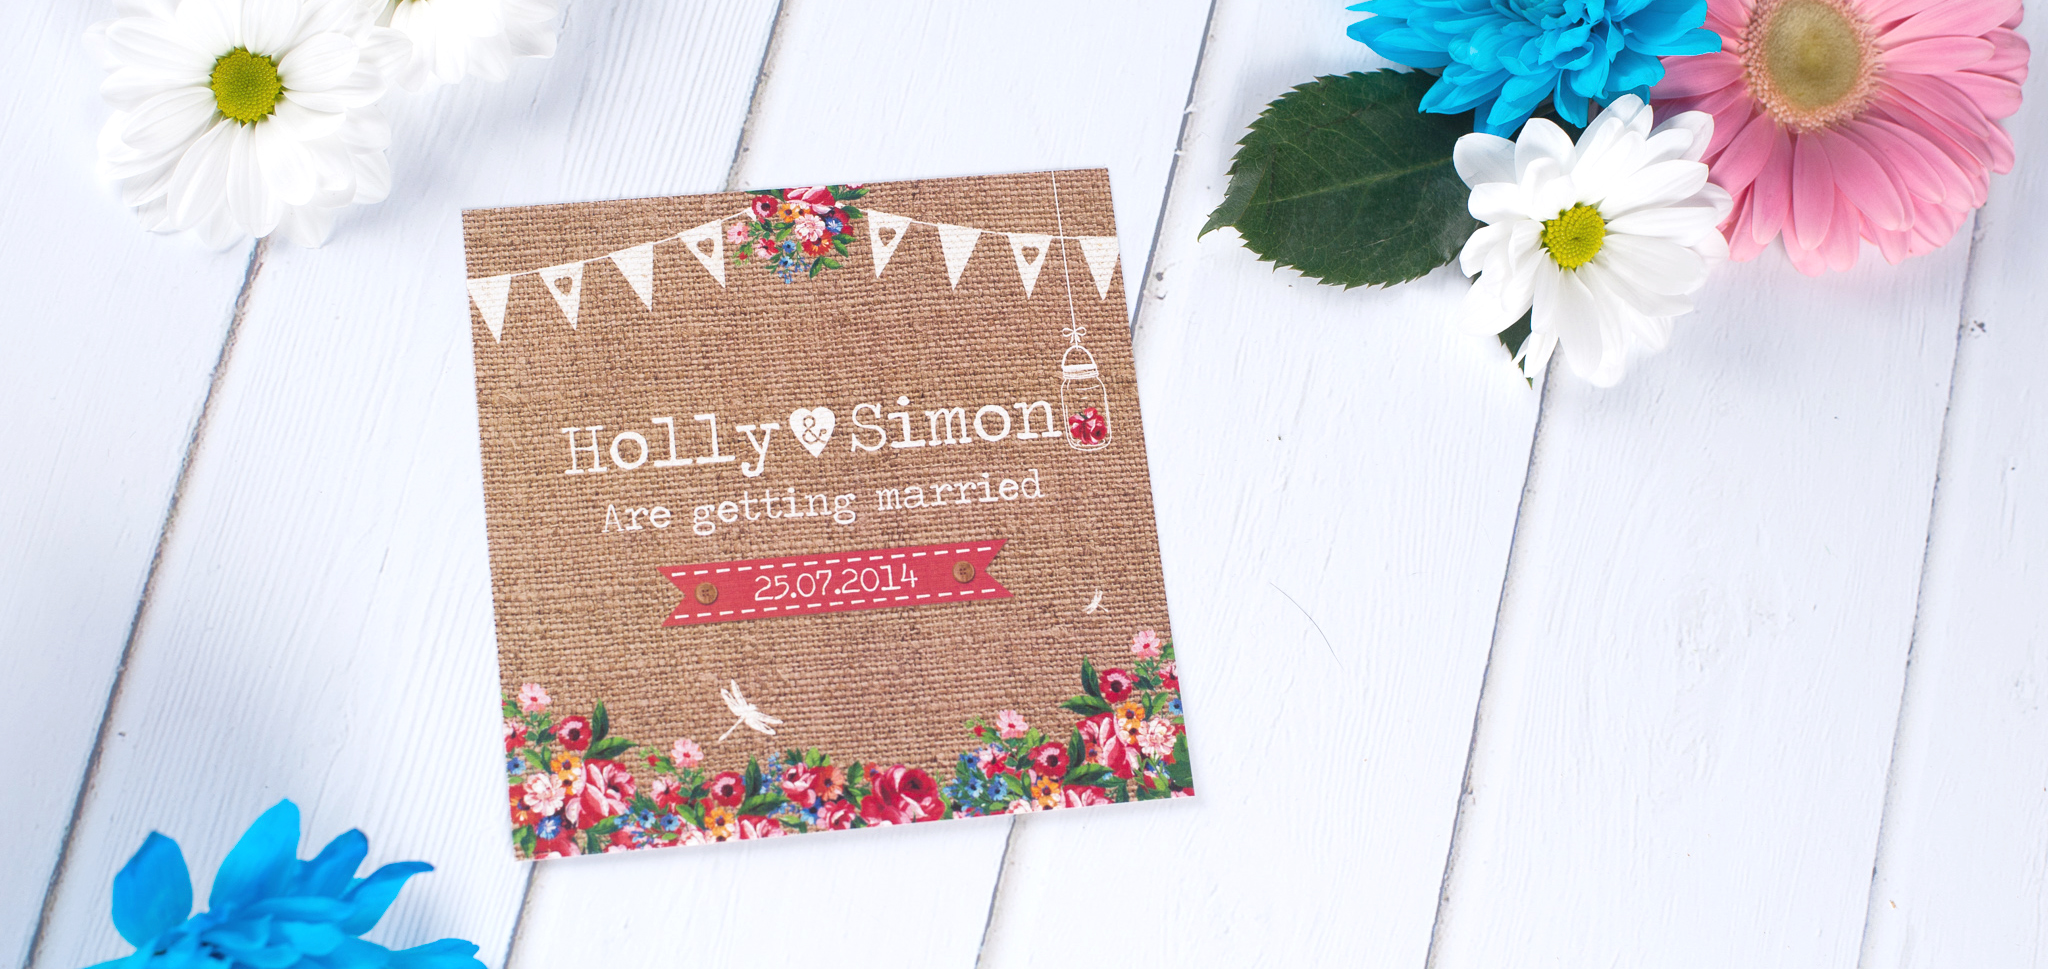 A hessian wedding invitatIon with bunting, mason jars and flowers